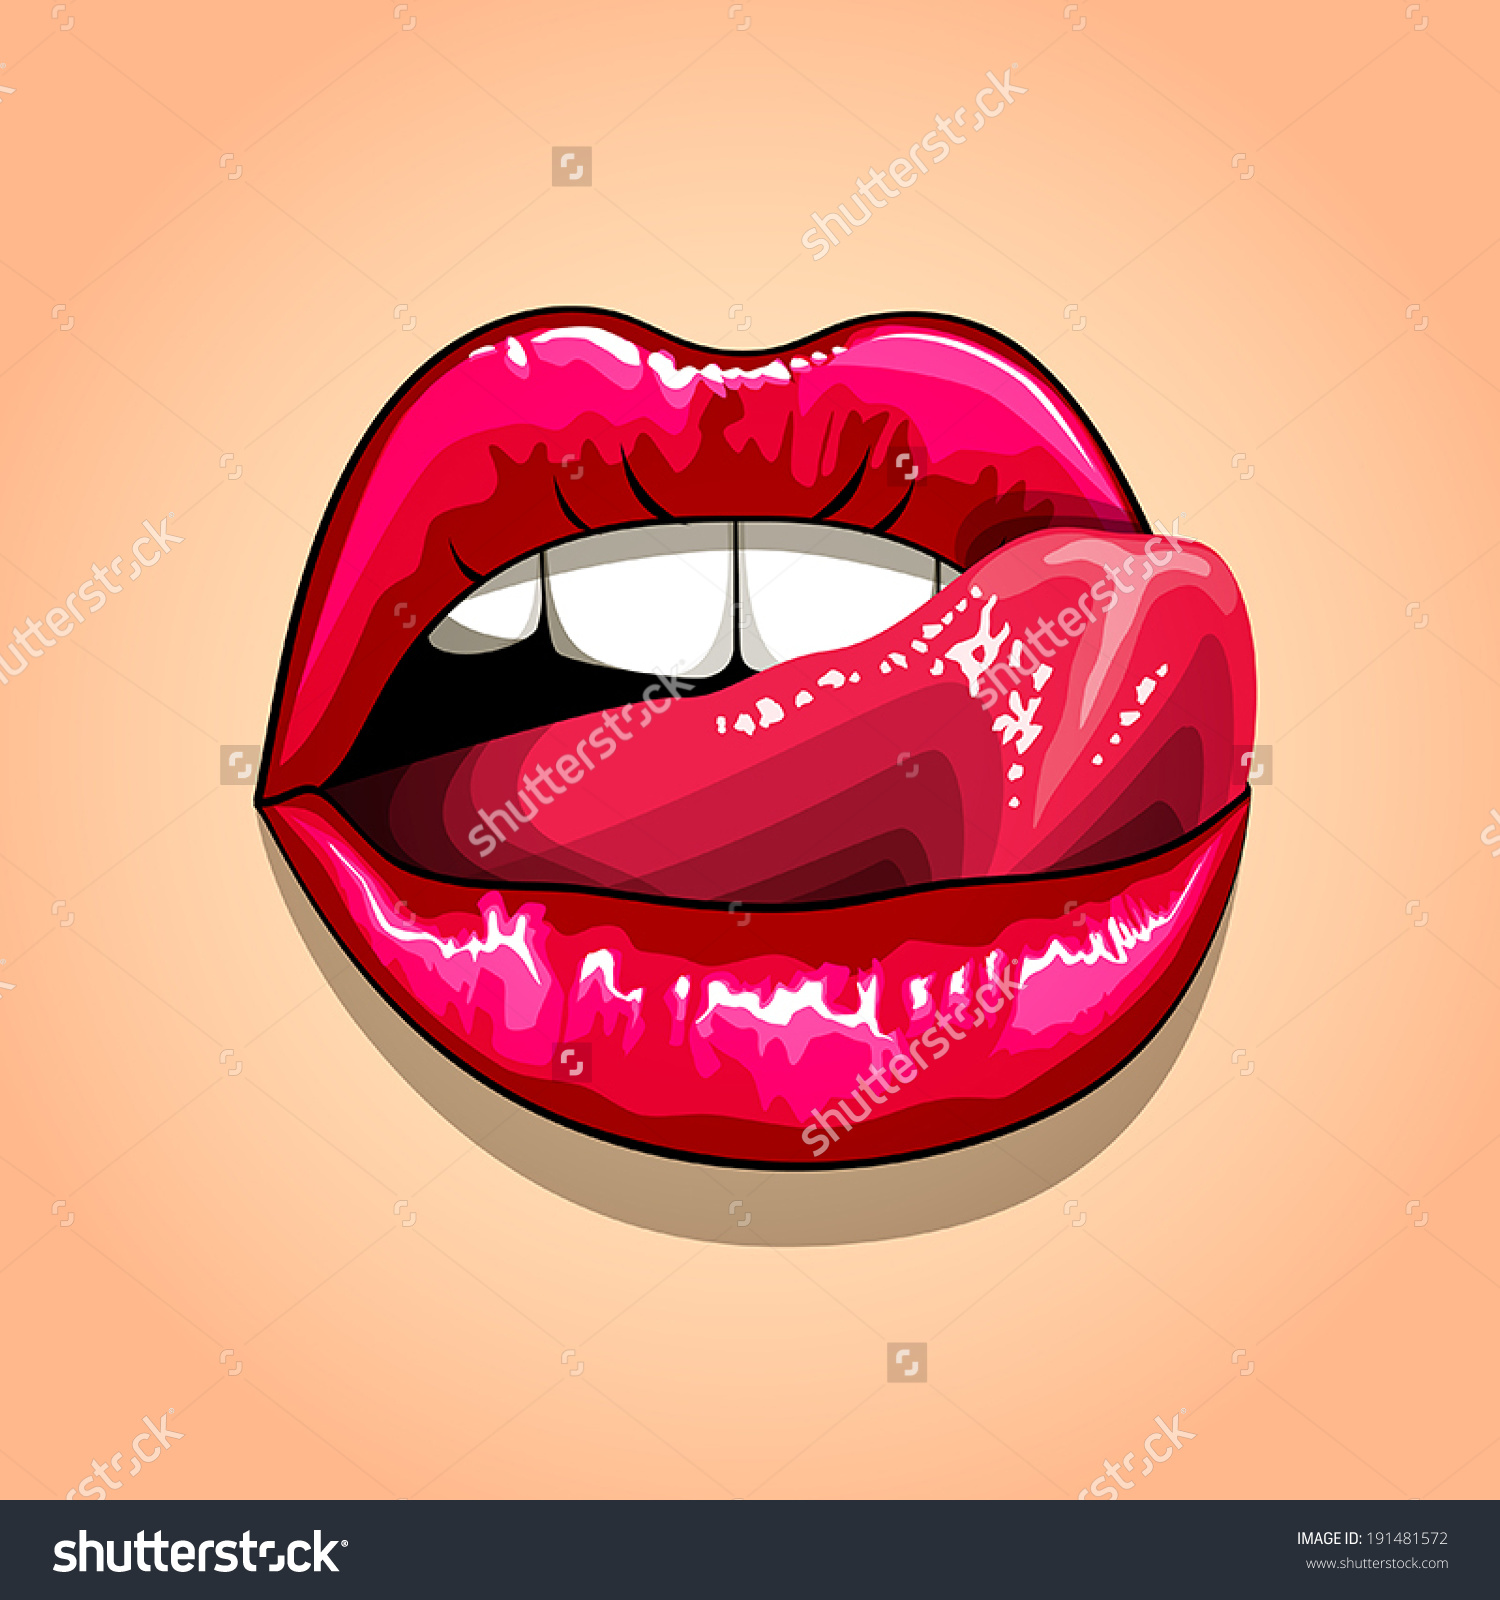 clipart licking lips - photo #7